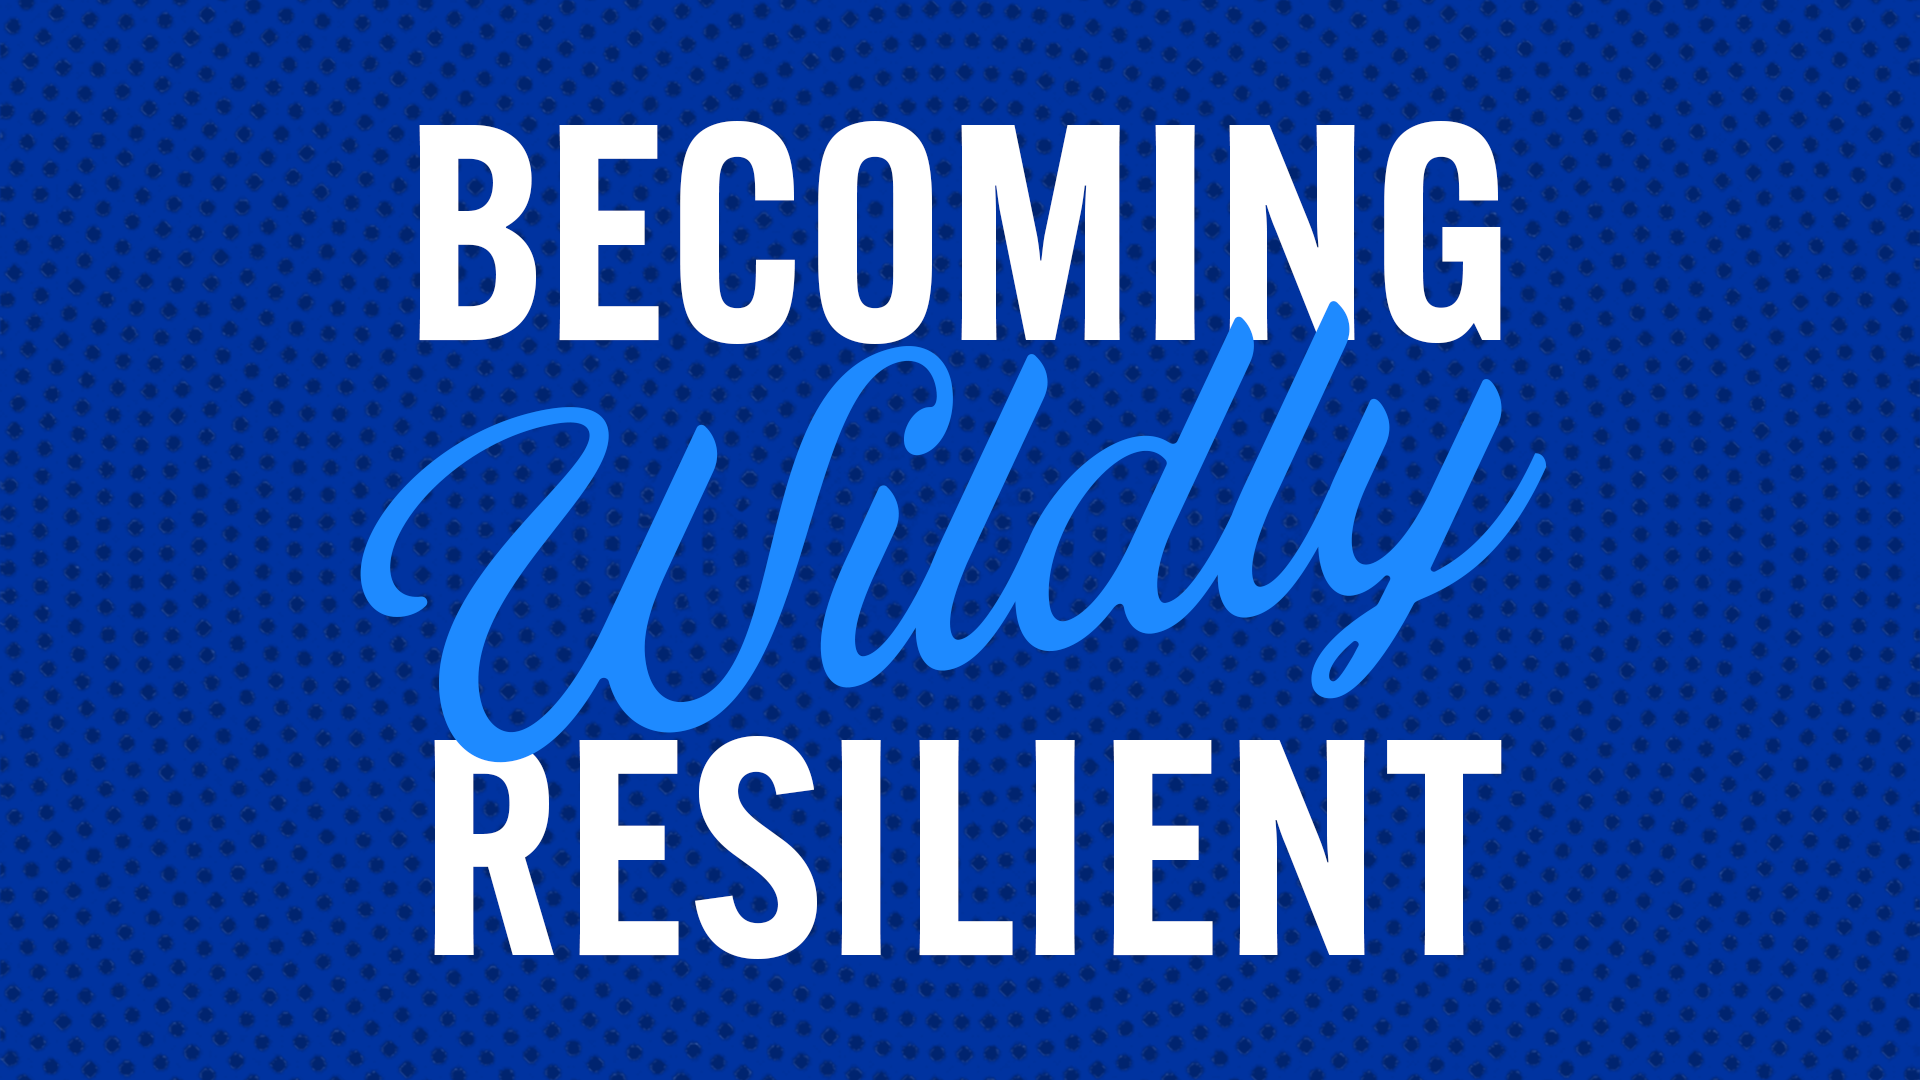 logo of Becoming Wildly Resilient podcast